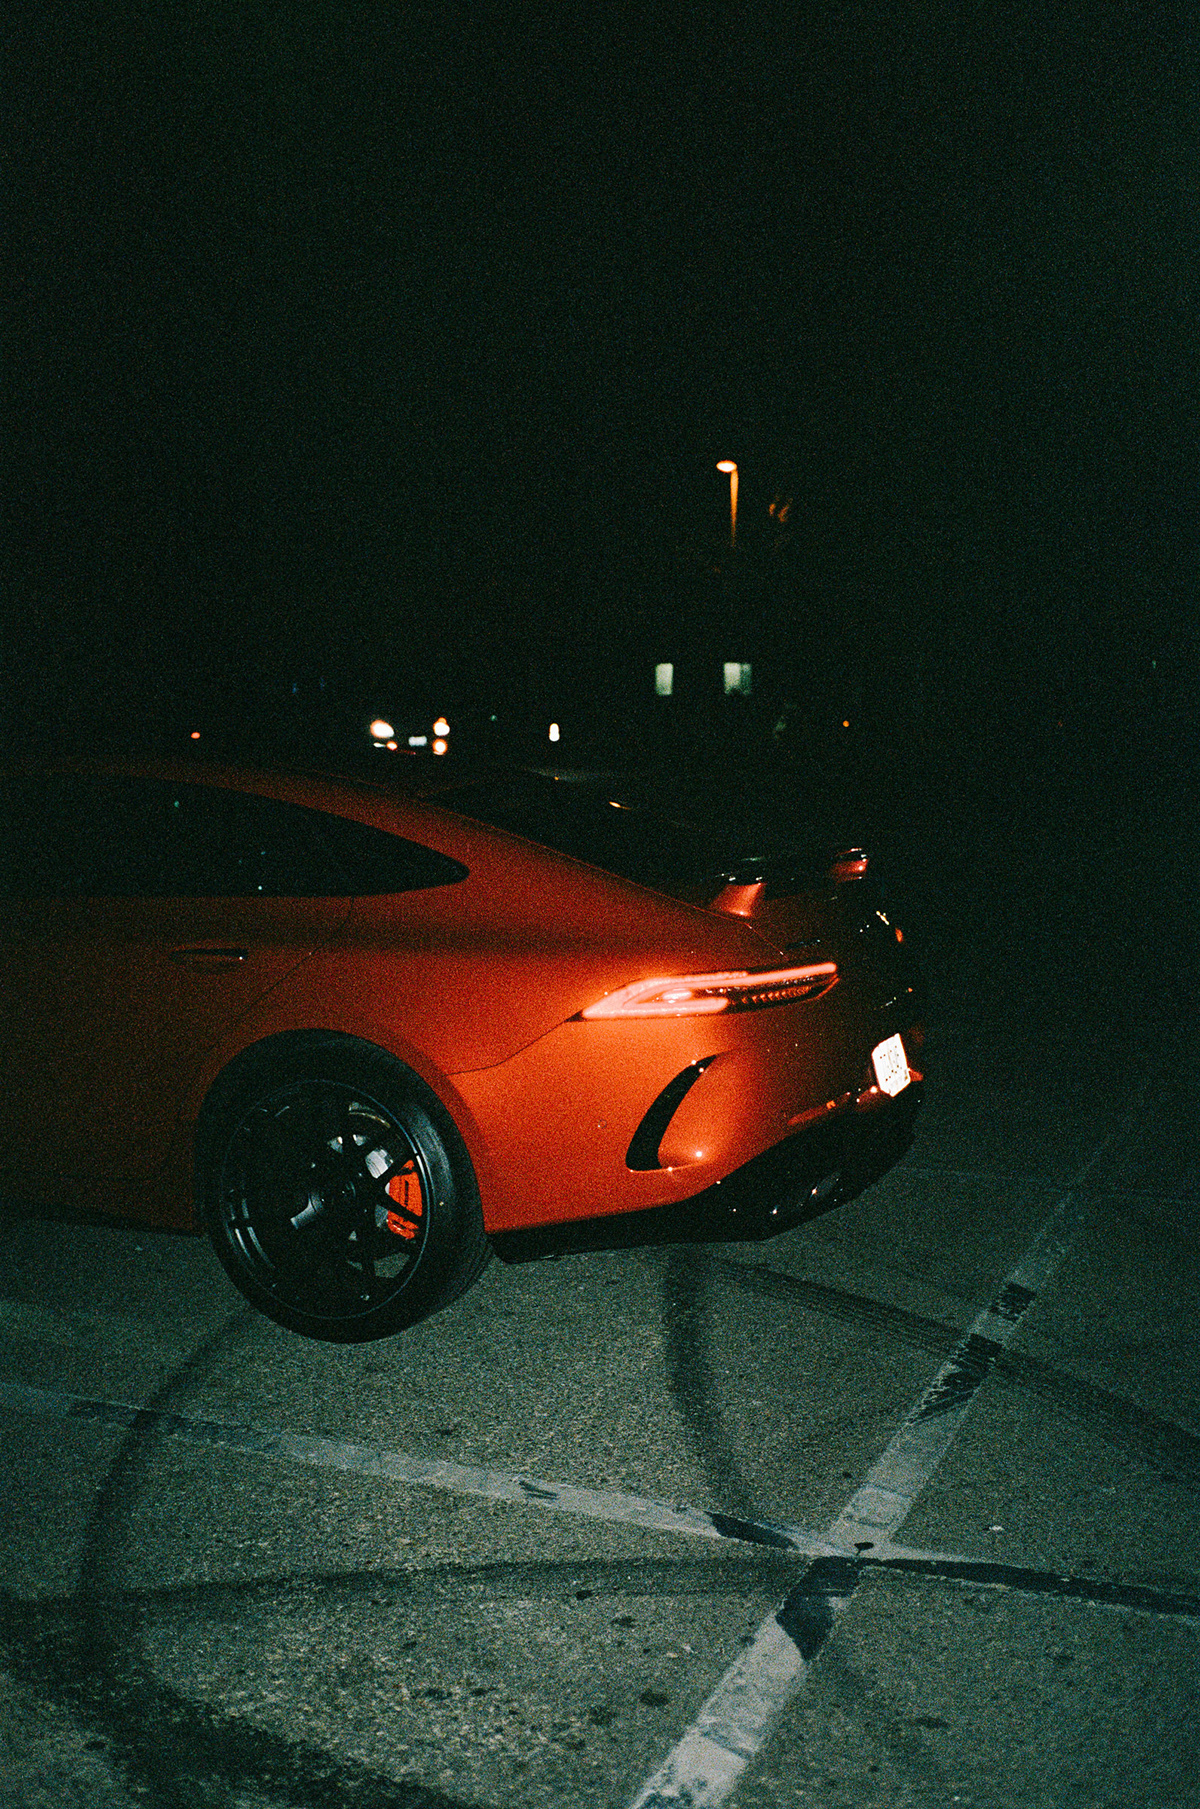 andre josselin 35mm contax t3 film photography California RoadTrip AMG Los Angeles Mercedes Benz Mercedes AMG